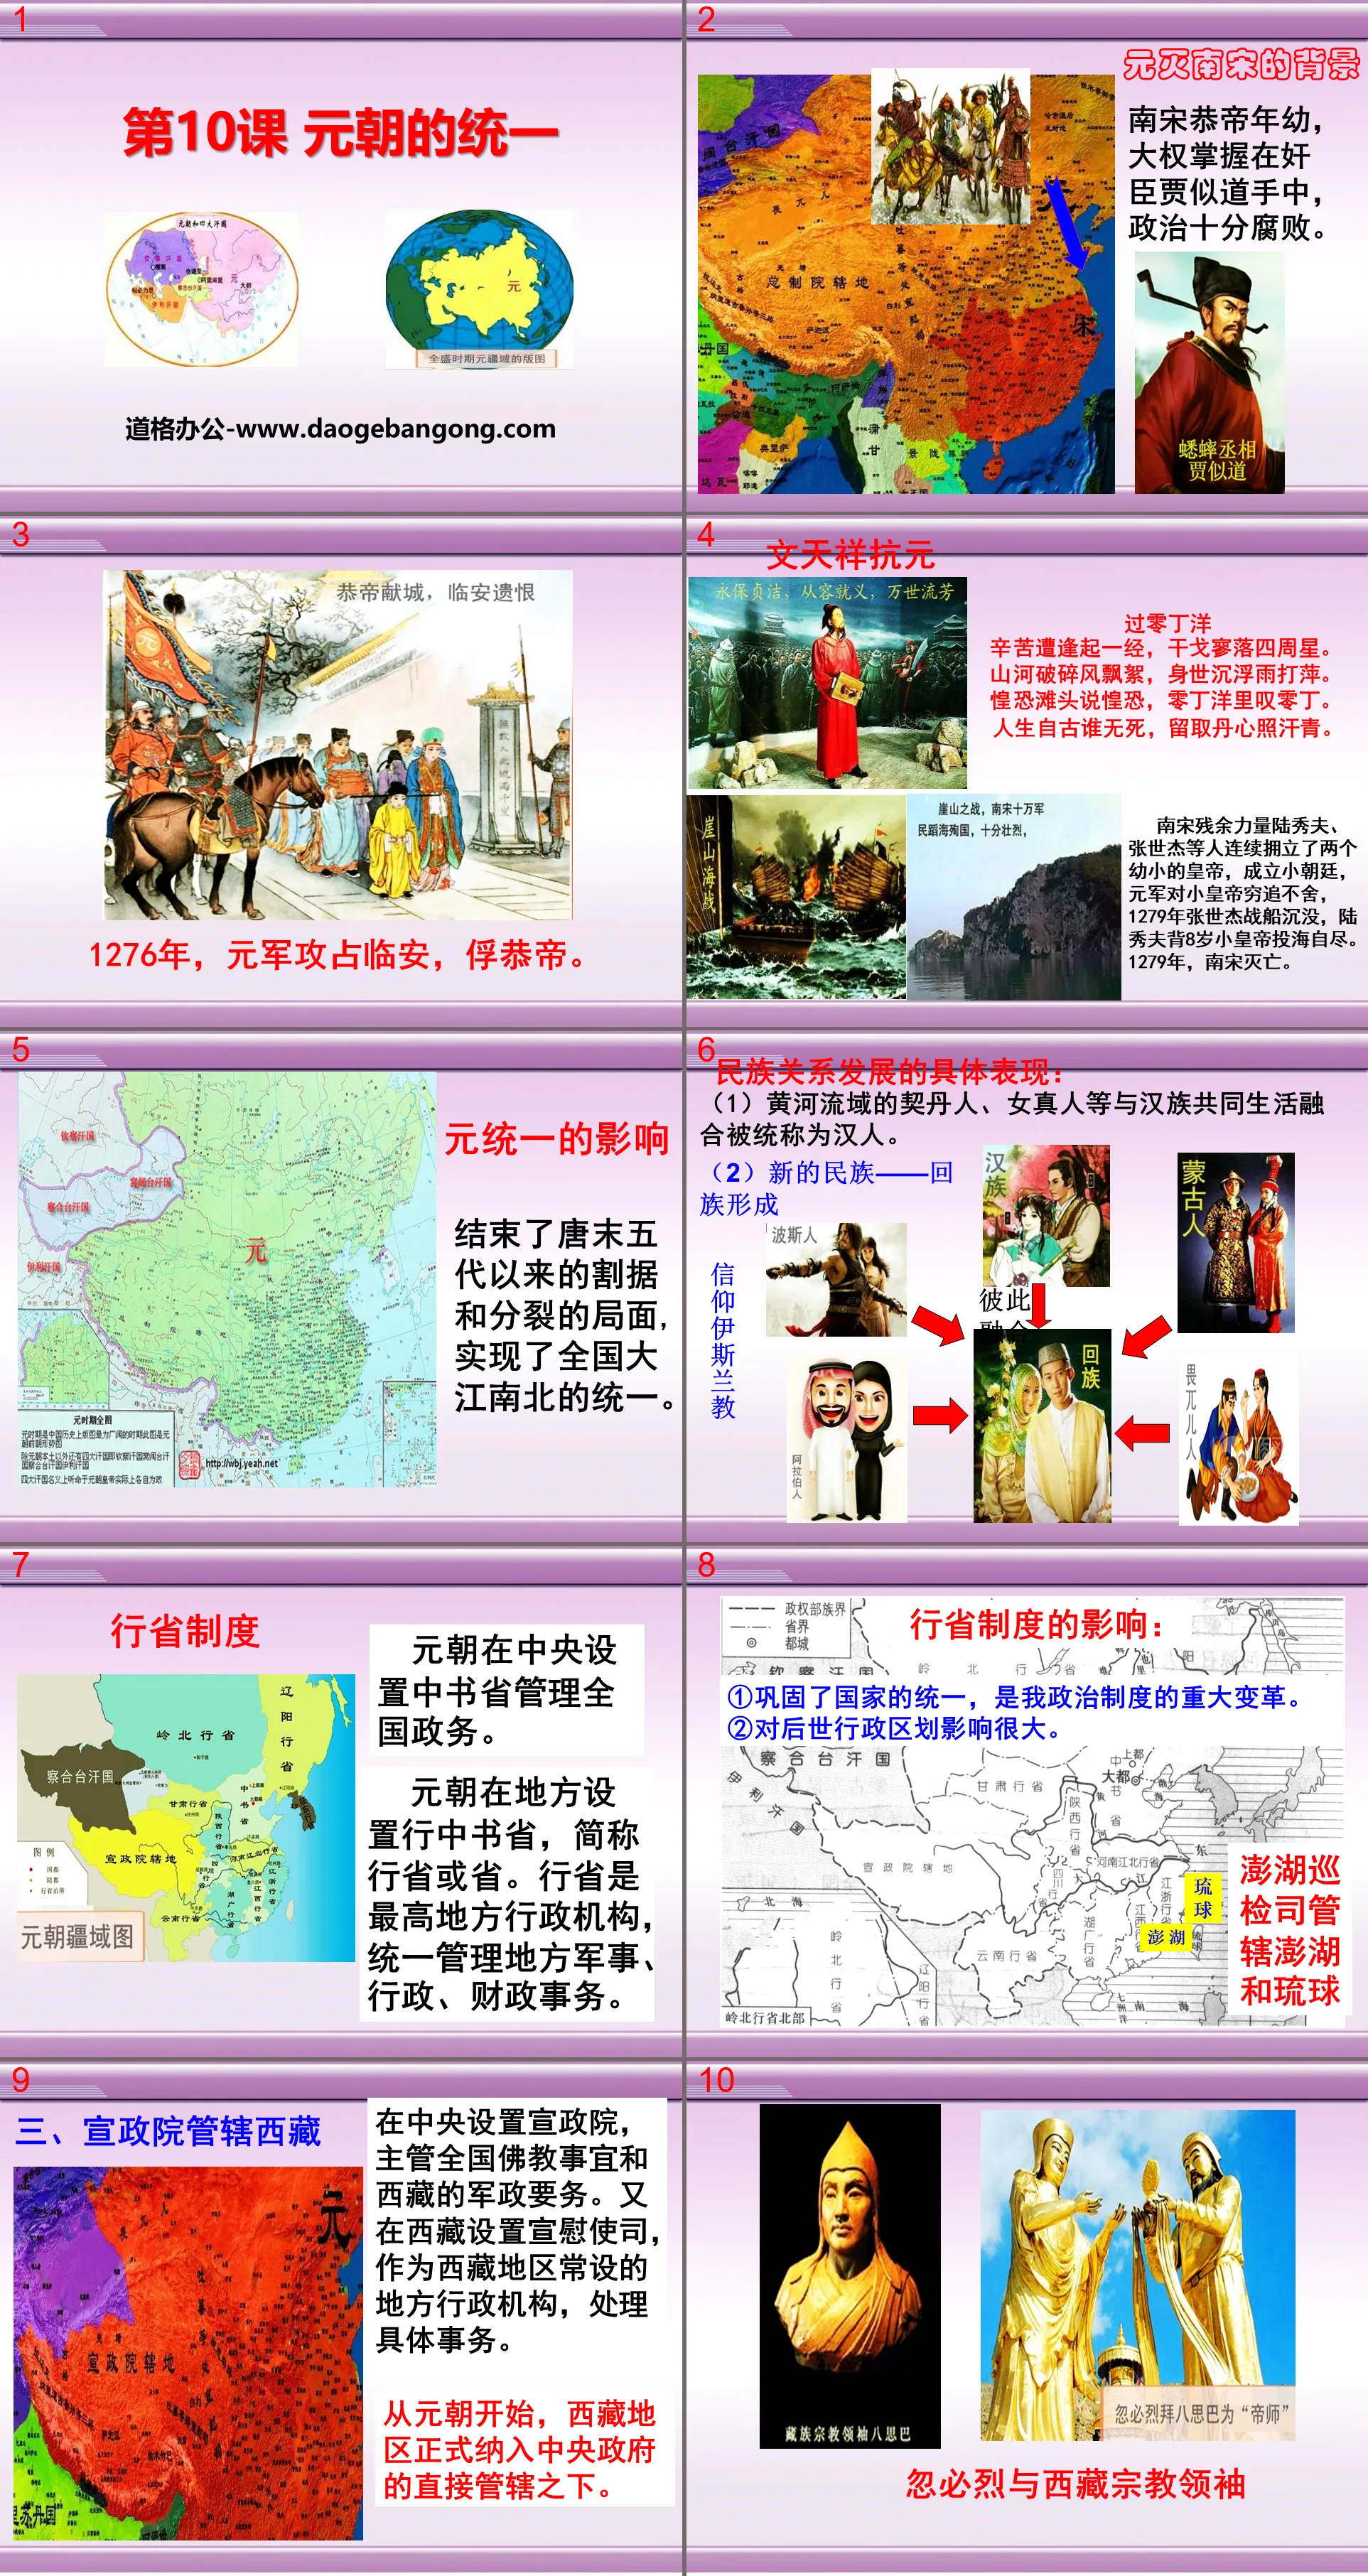 "The Unification of the Yuan Dynasty" PPT courseware 4 during the Song and Yuan Dynasties